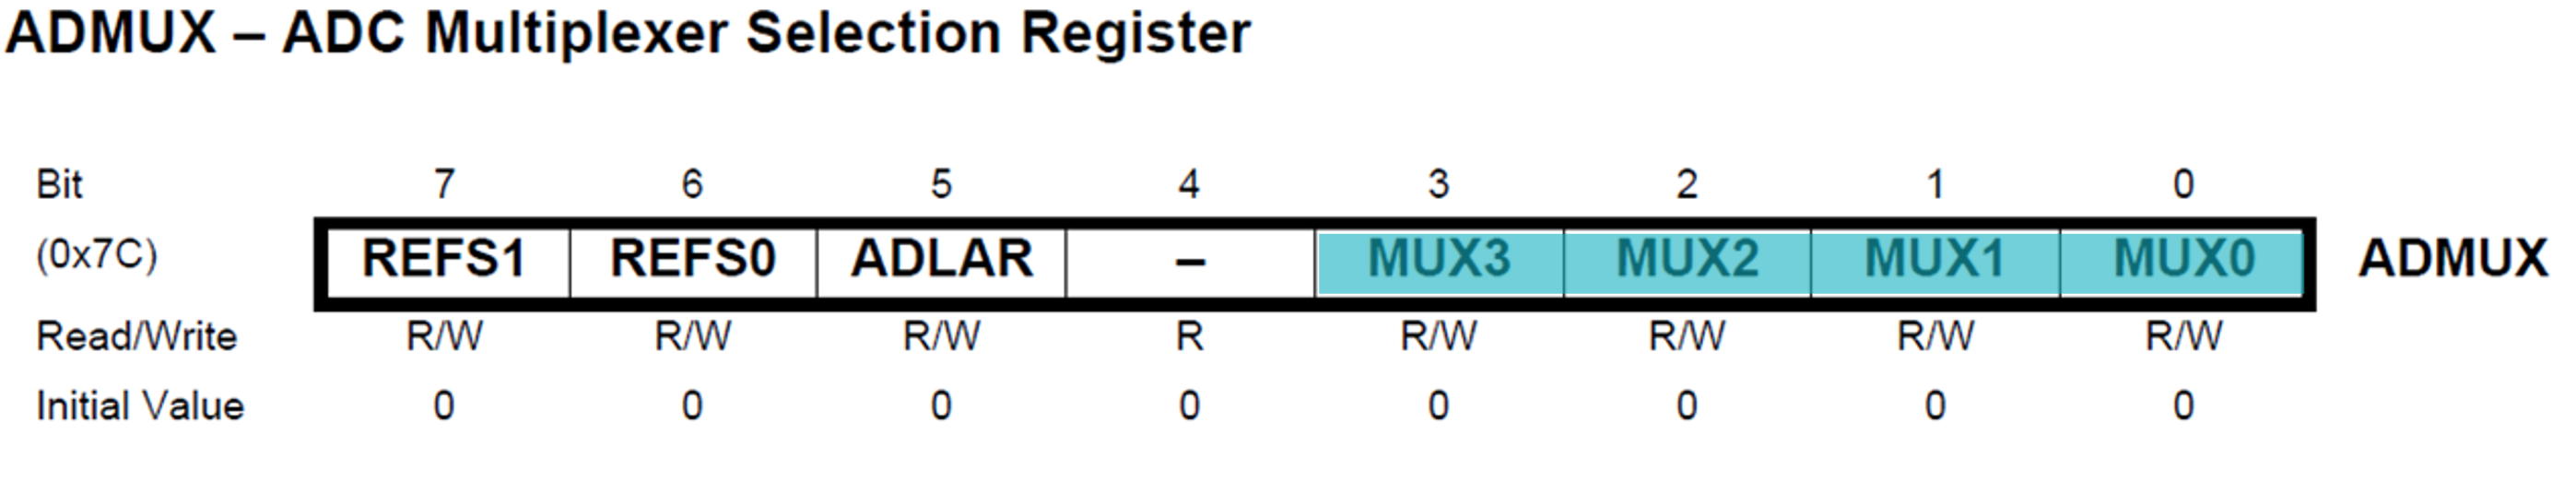 The ADMUX Register with bit5 highlighted